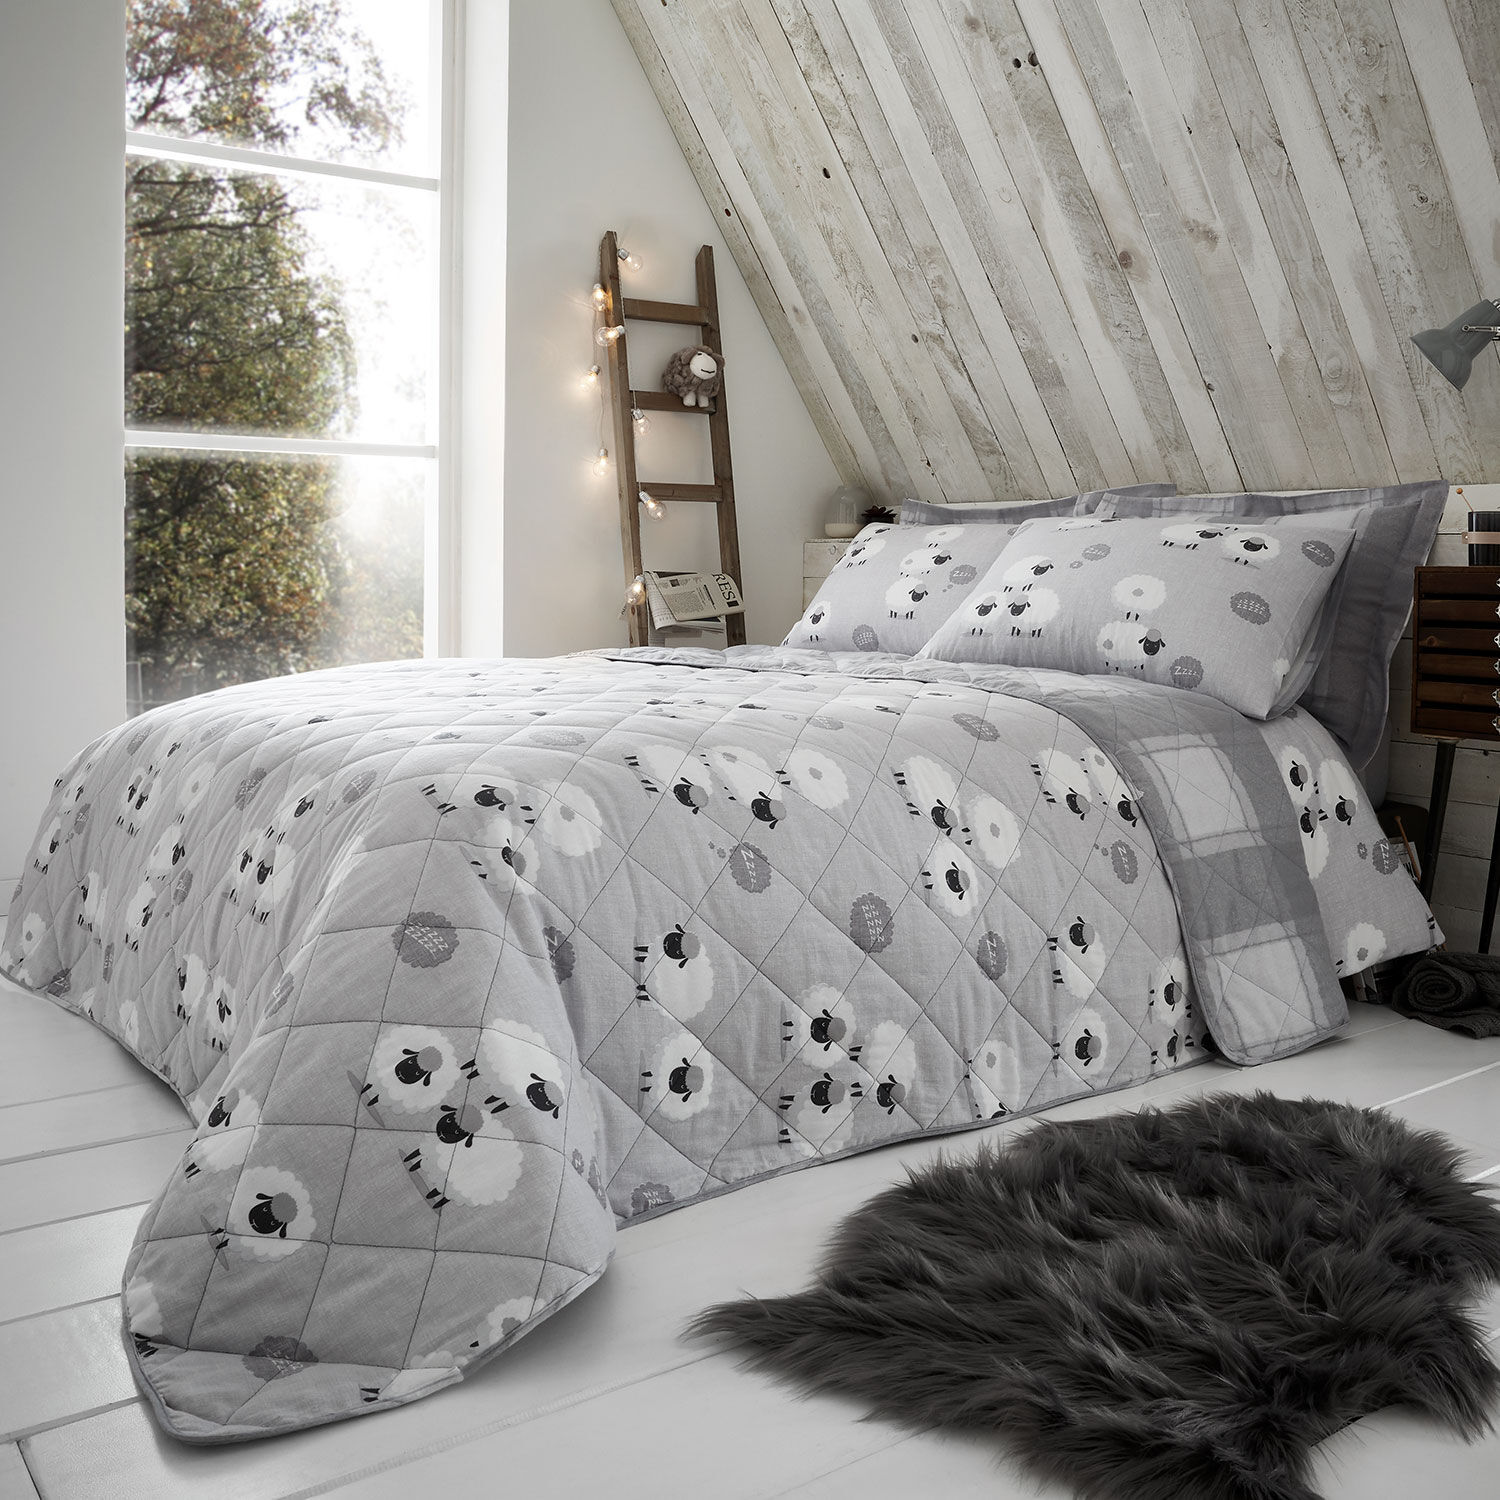 Brushed Cotton Snoozy Sheep Bed Linen, Grey Super King Bed Linen